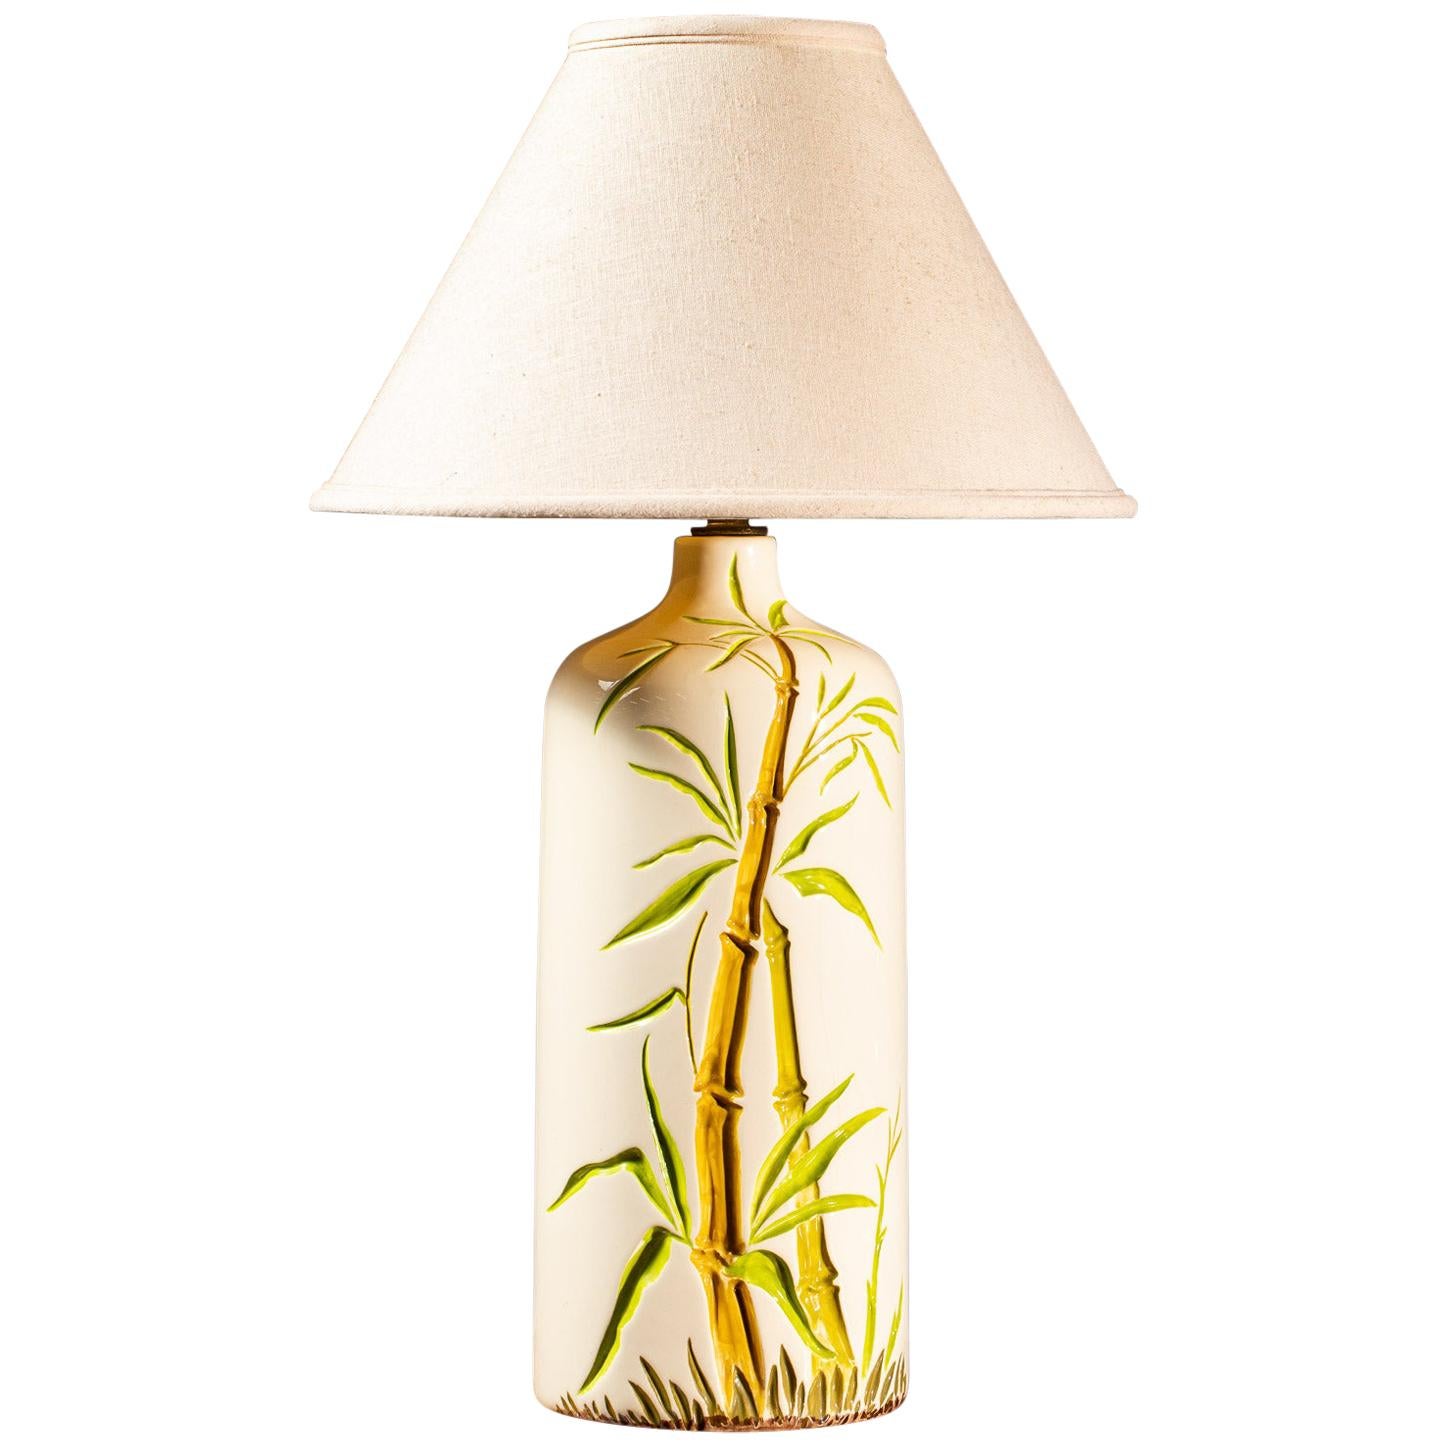 Vintage American Large Ceramic Hand Painted Bamboo Lamp, circa 1960 For Sale